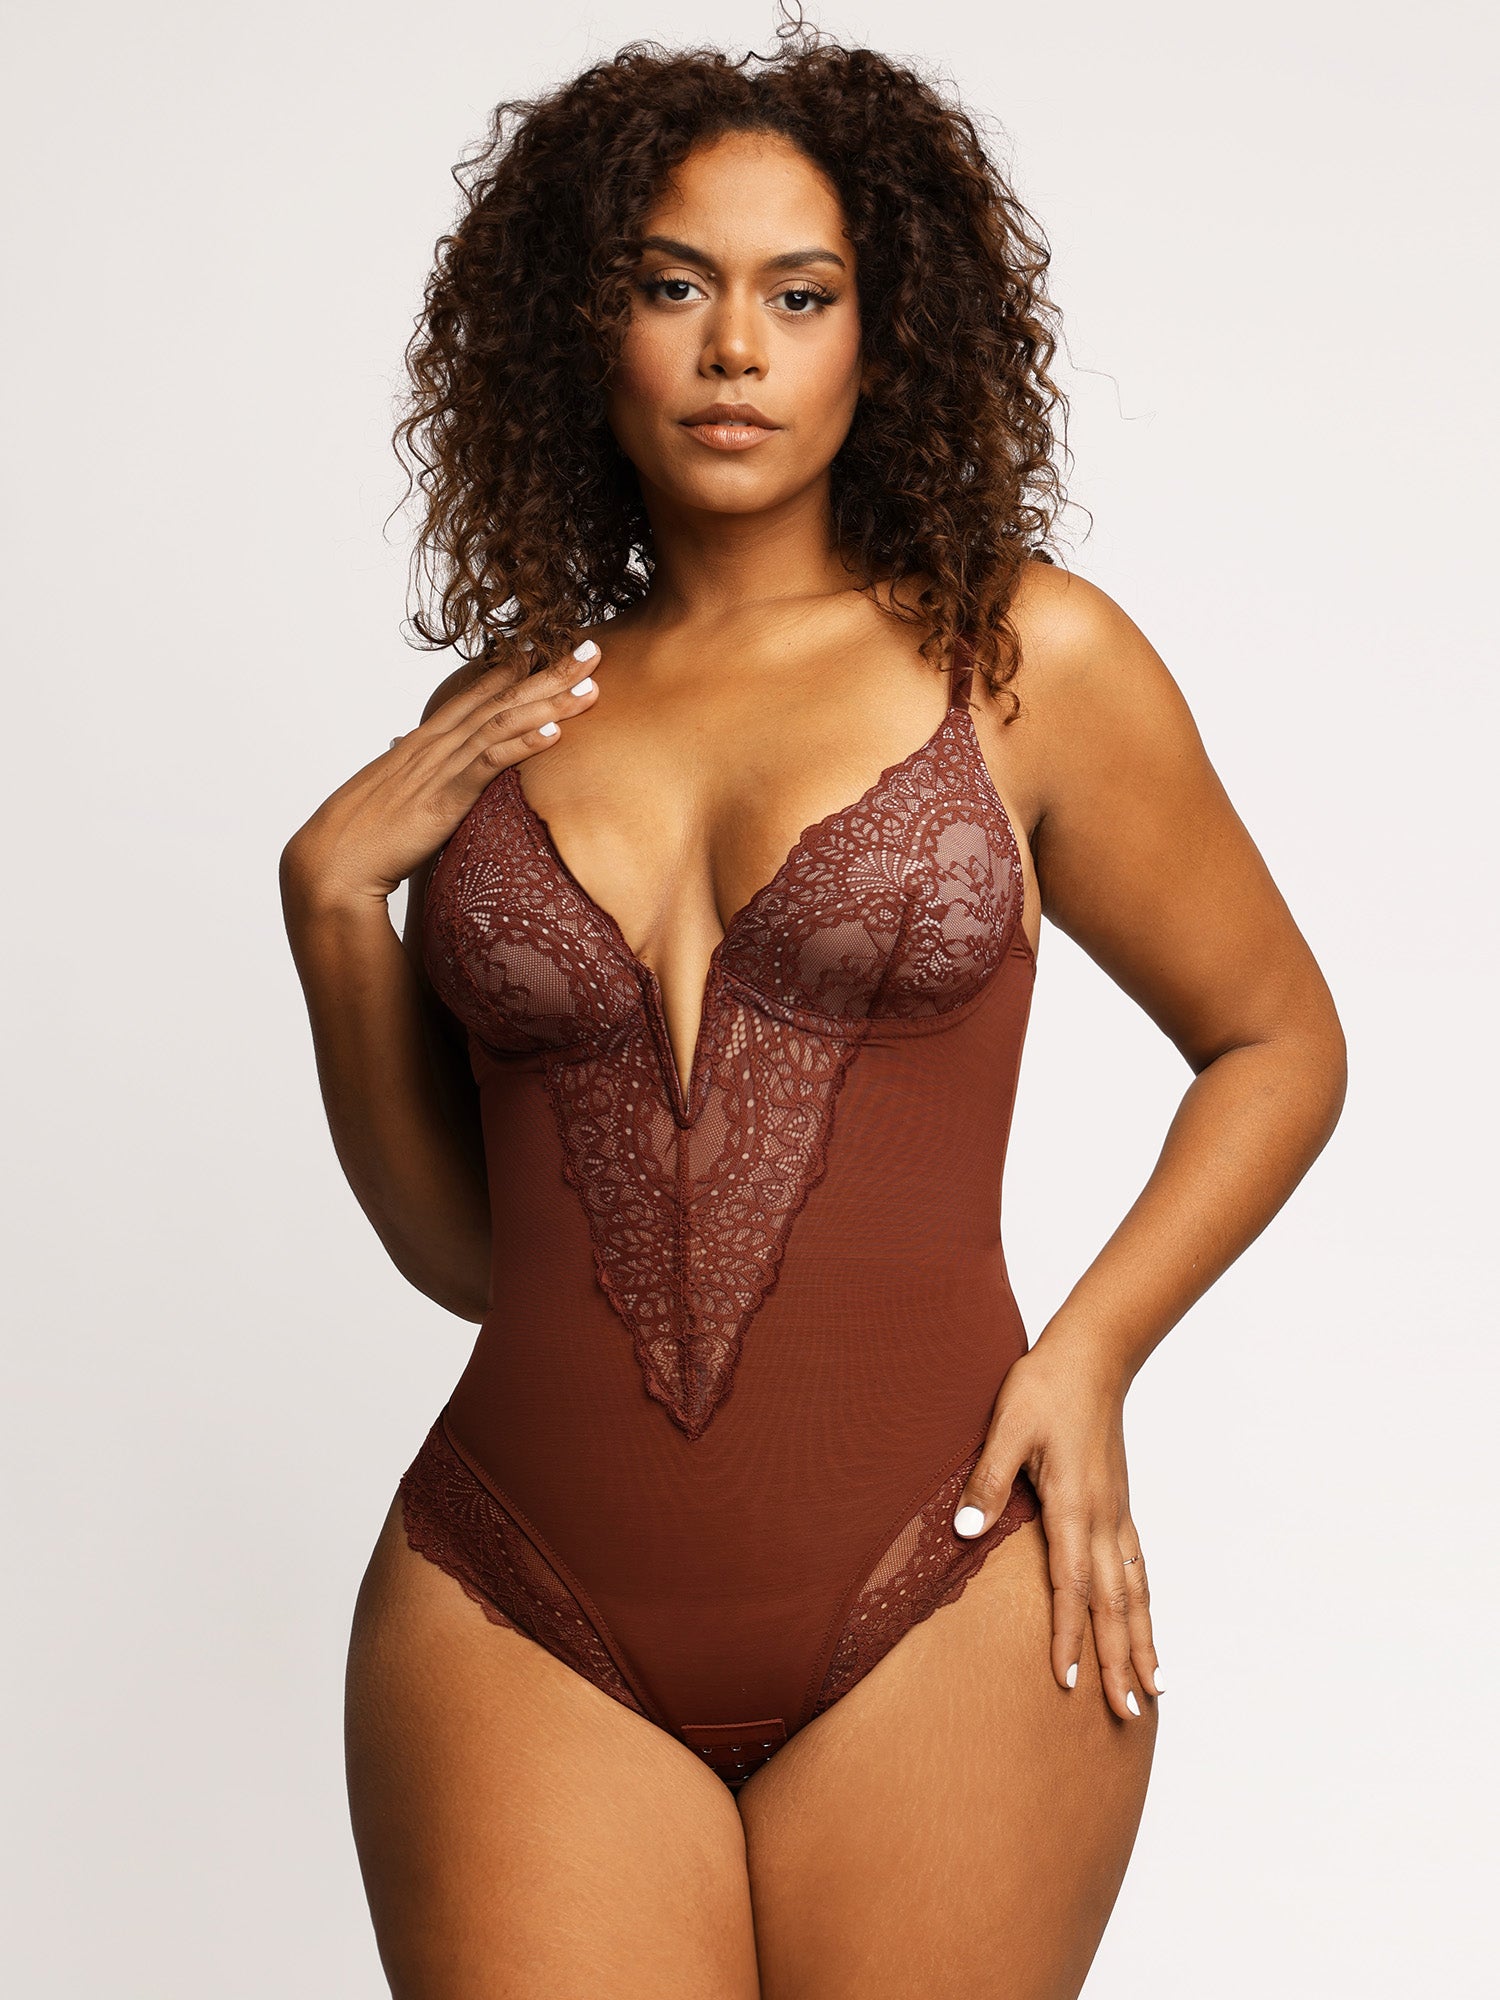 Made with breathable, high-elastic, and double-layer fabric, the Deep-V Neck Lace Thong Shapewear Bodysuit offers comfortable shaping for a smooth, flattering silhouette.